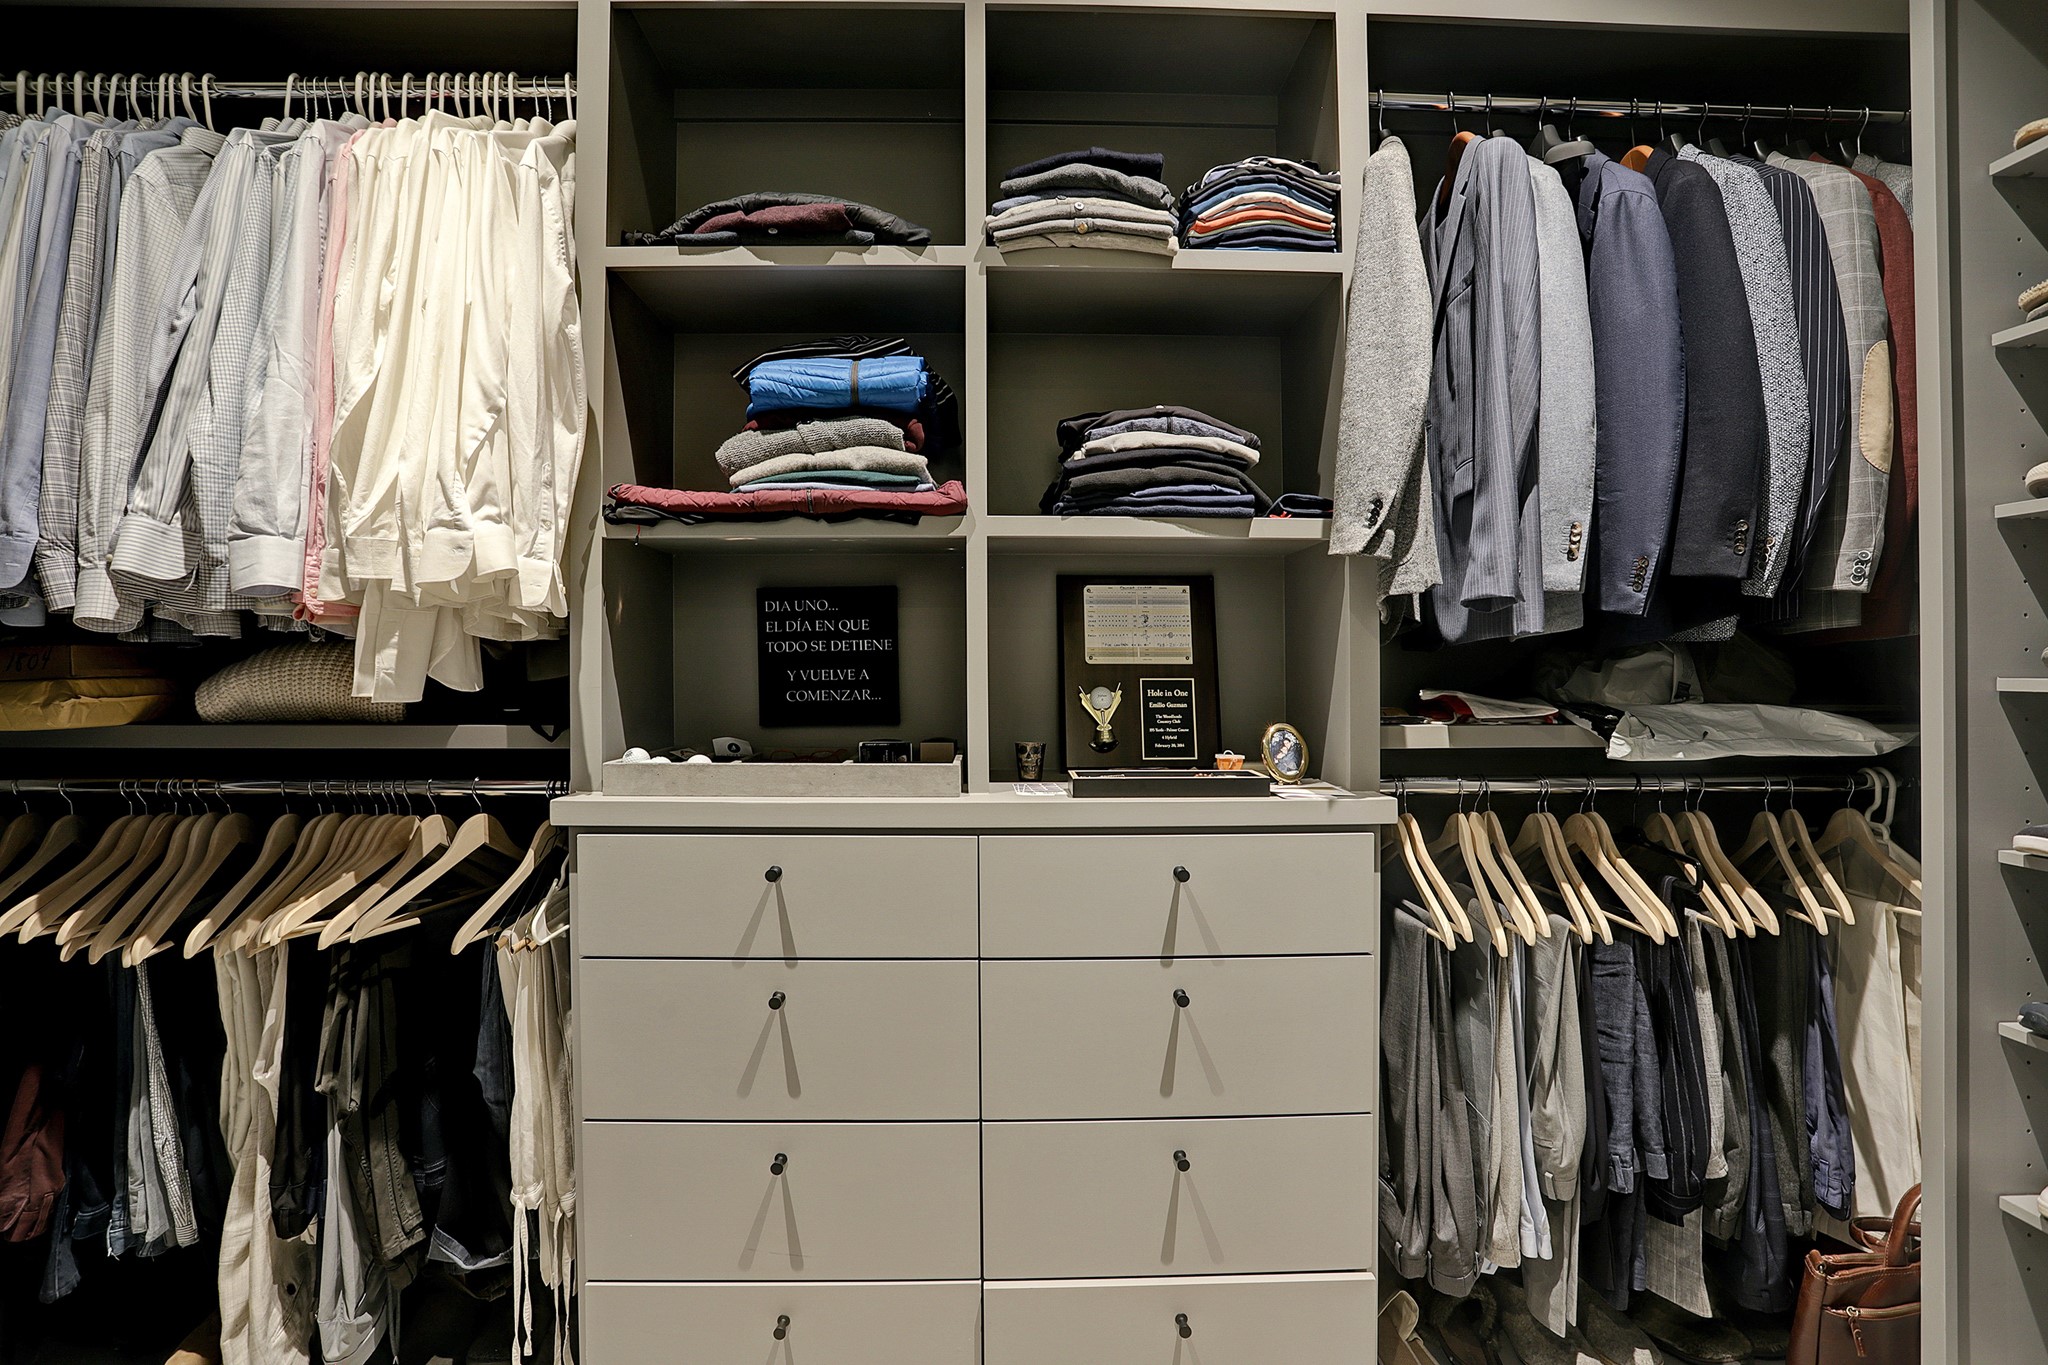 The CUSTOMIZED WALK-IN CLOSET has two built-in drawer systems, open shelving, shoe shelving, and ample clothes hanging space.